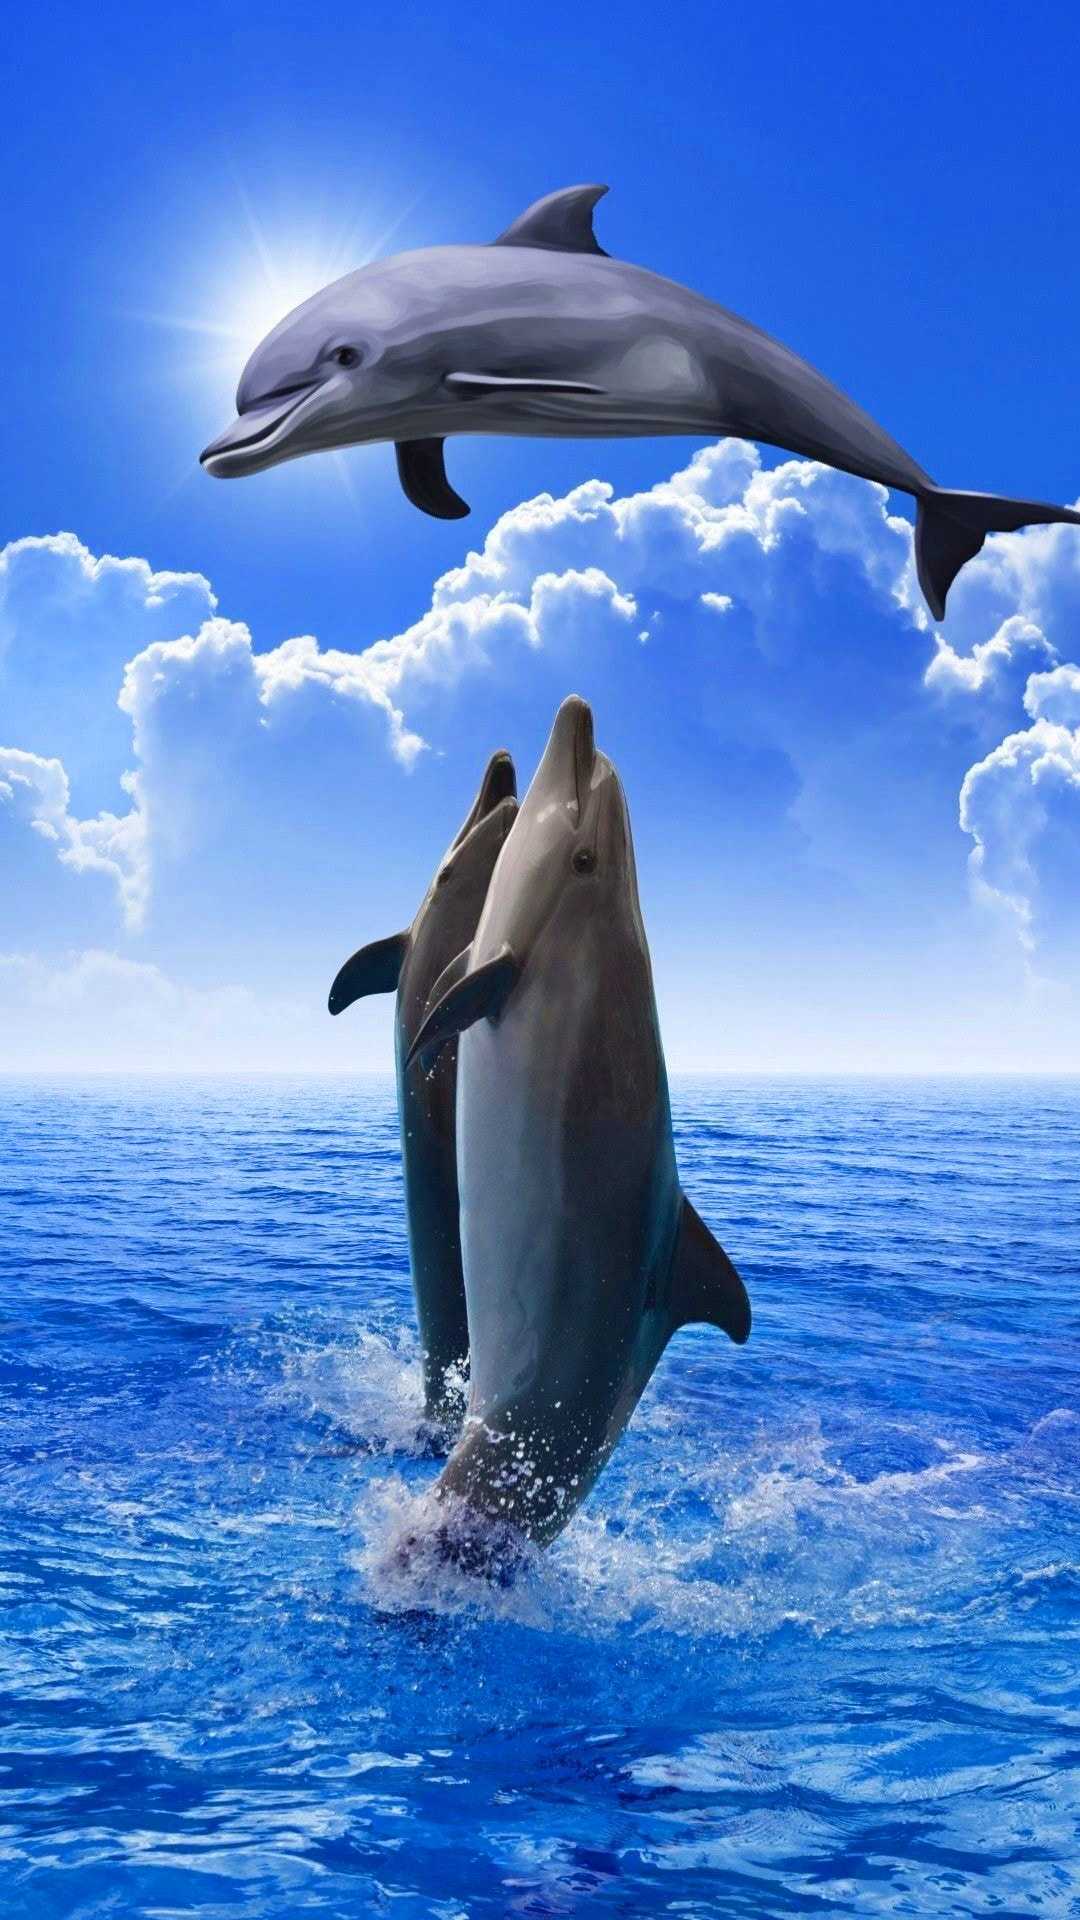 Dolphin Background 1